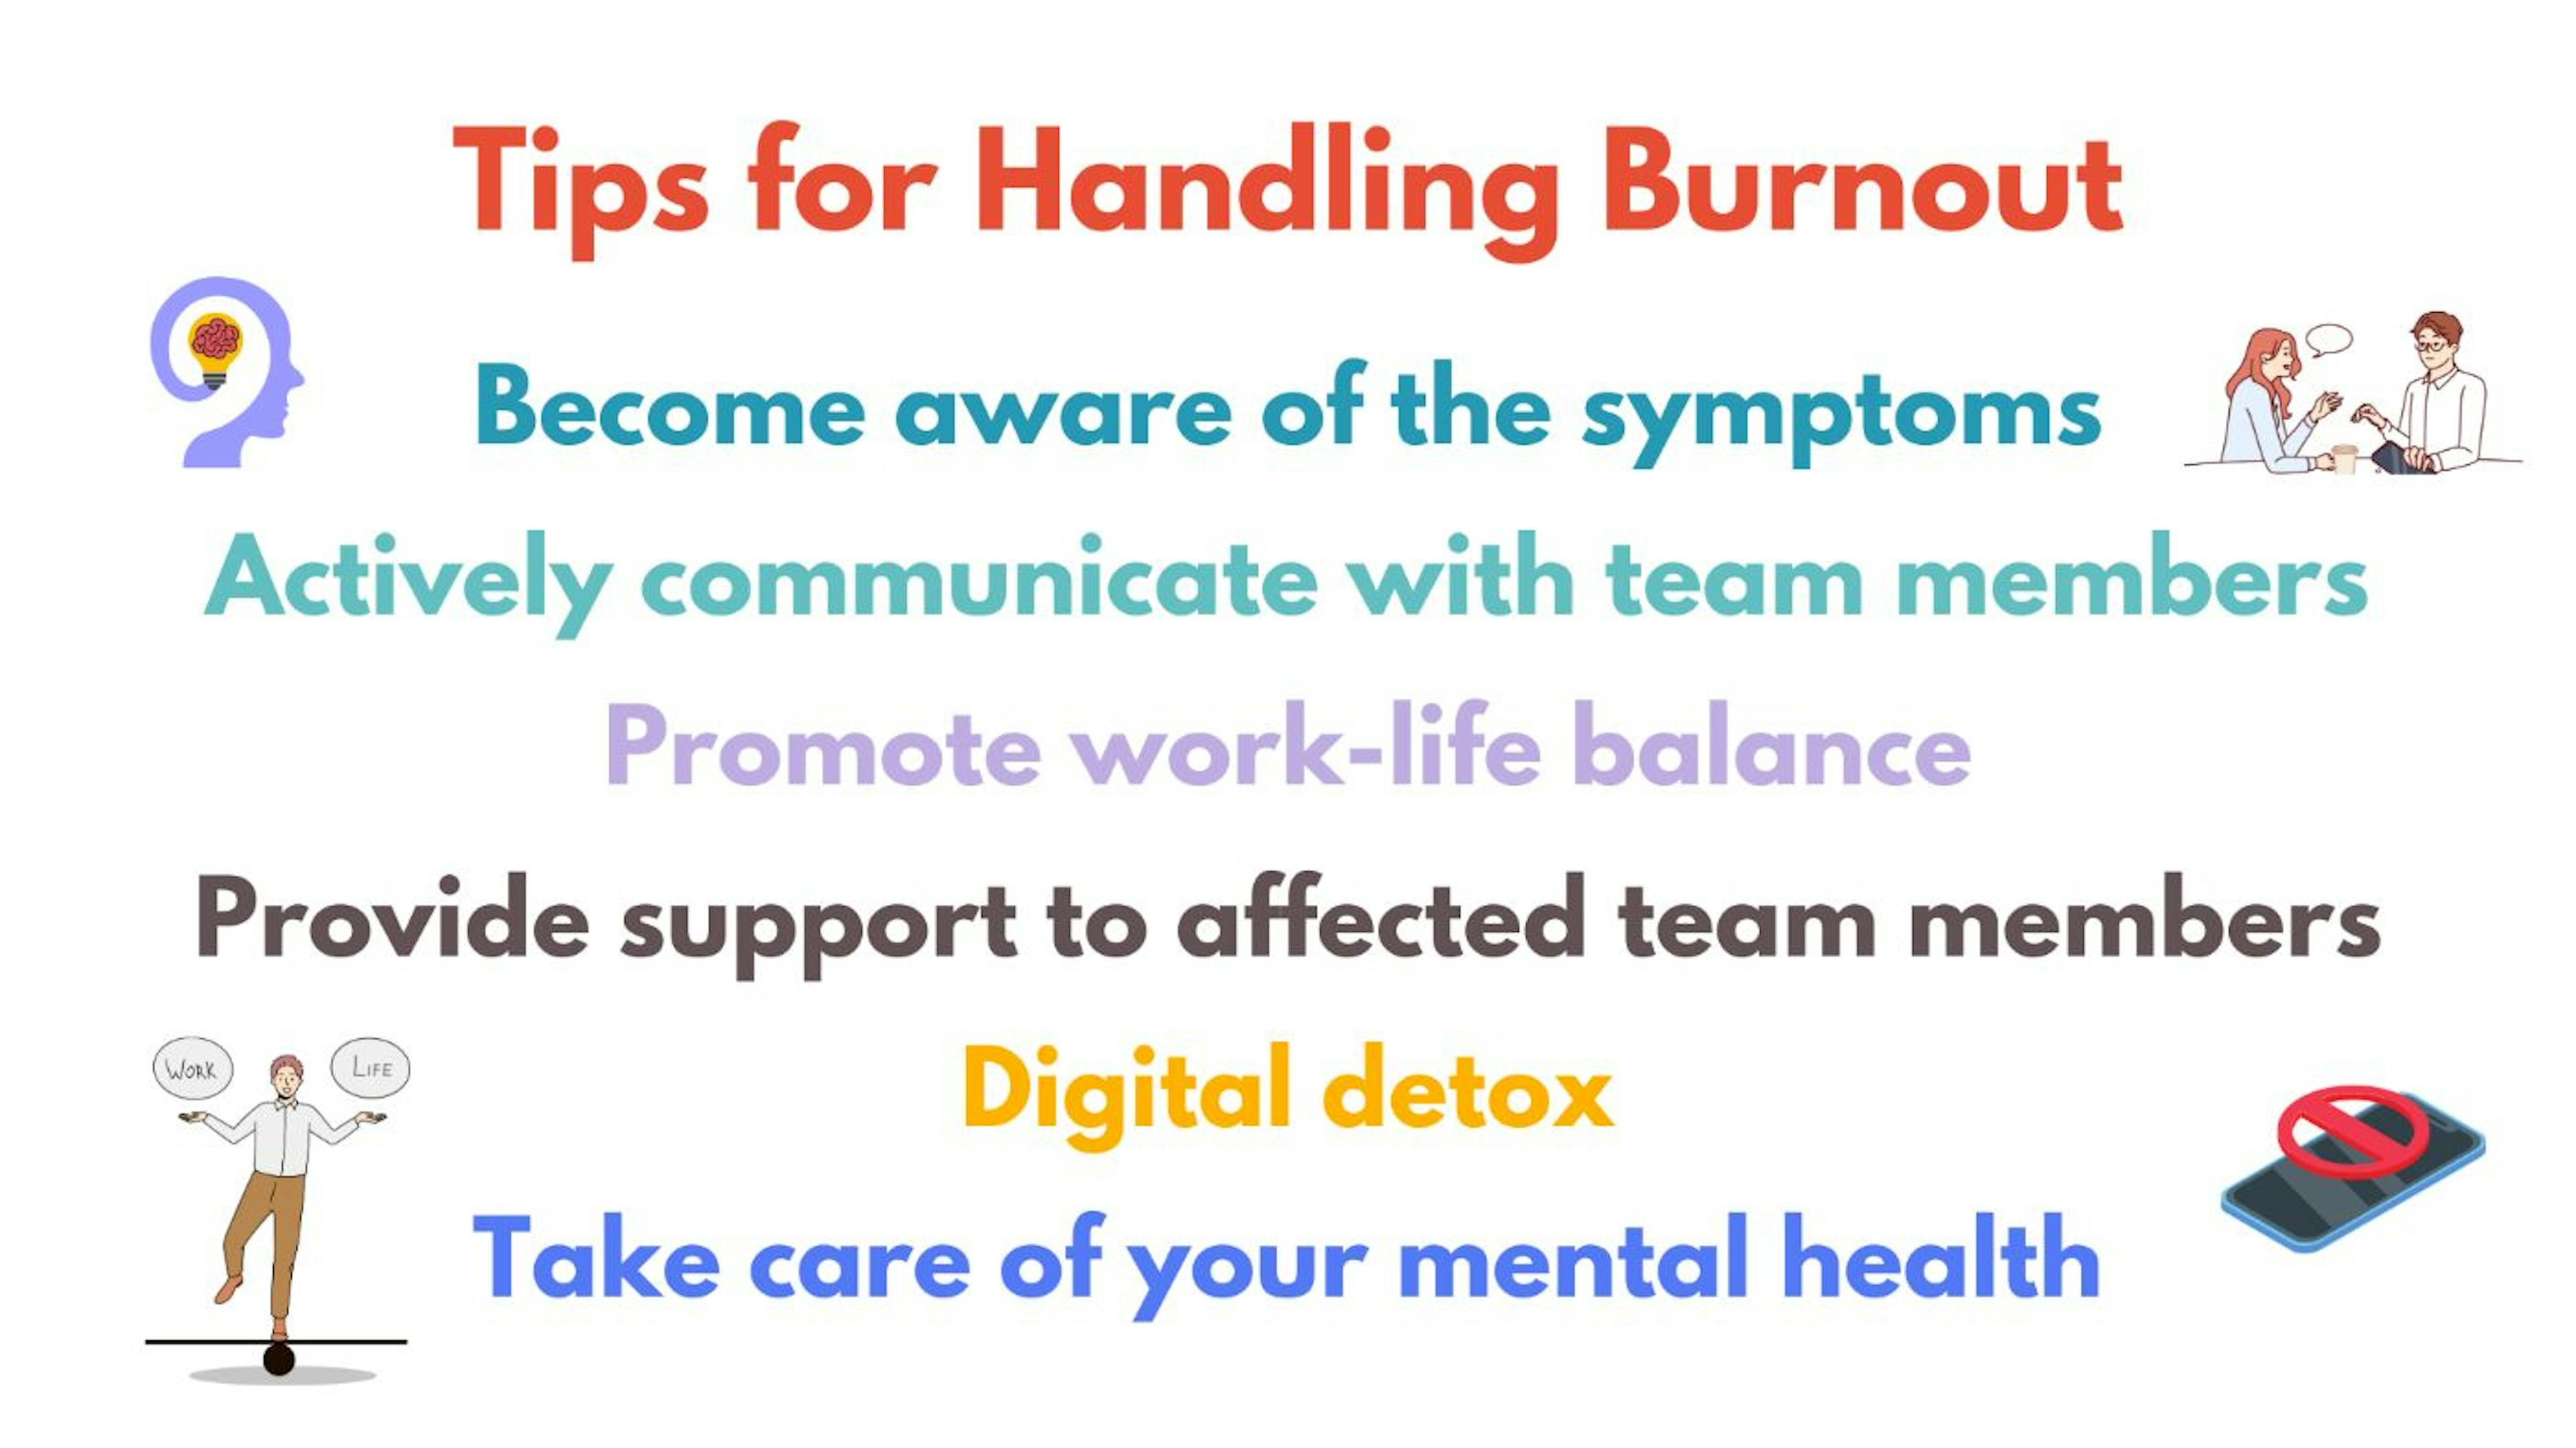 Use these tips to handle burnout wihtin your team.